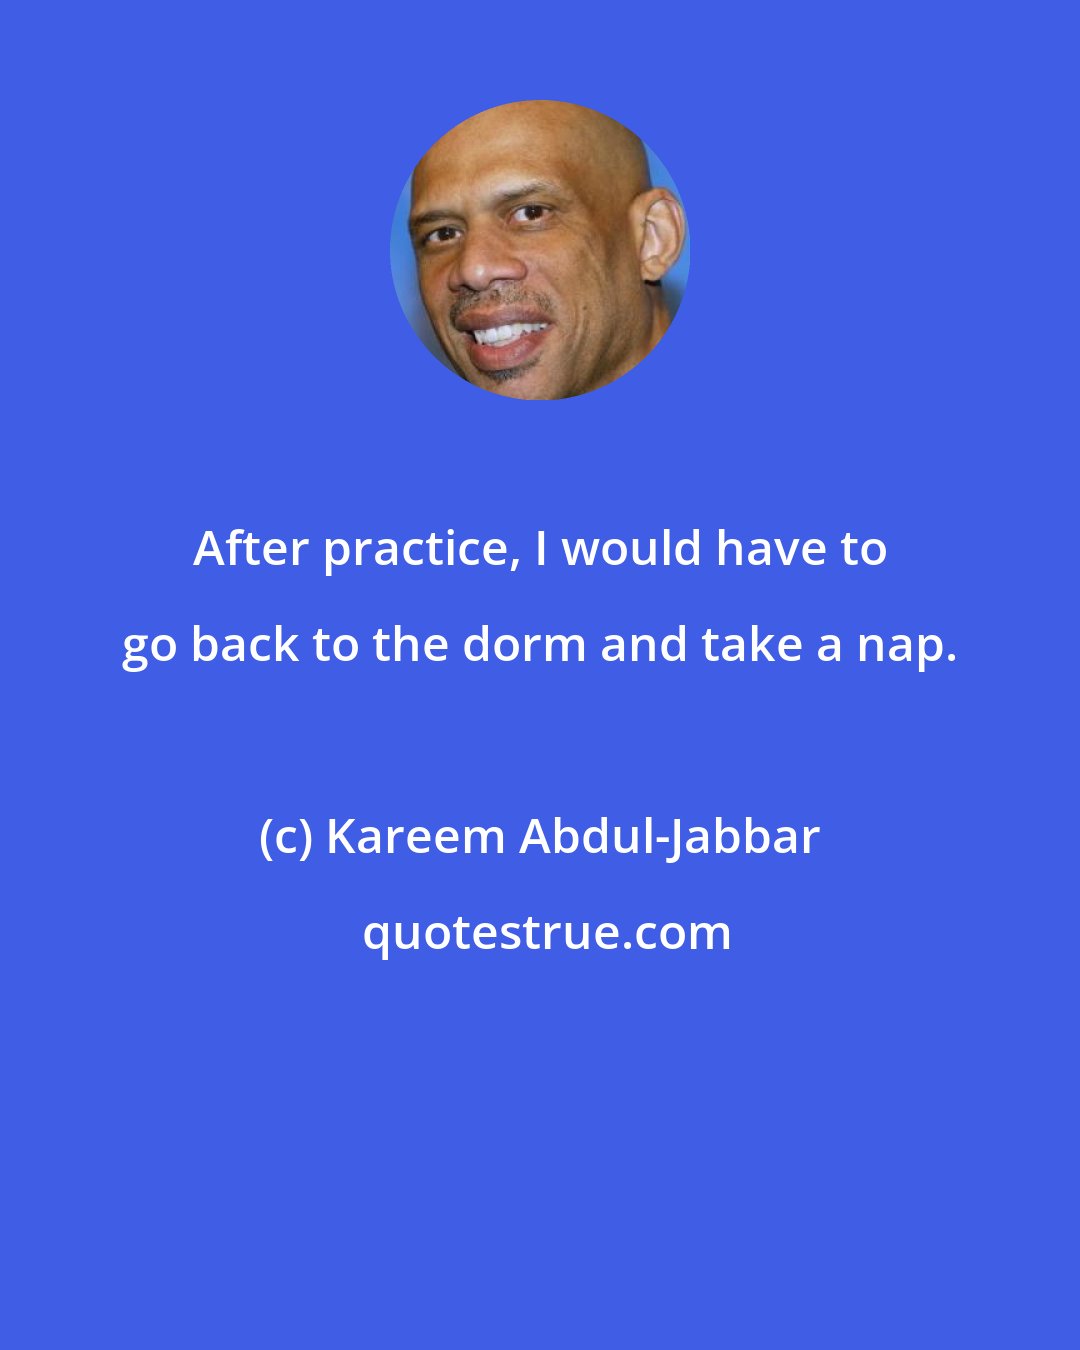 Kareem Abdul-Jabbar: After practice, I would have to go back to the dorm and take a nap.